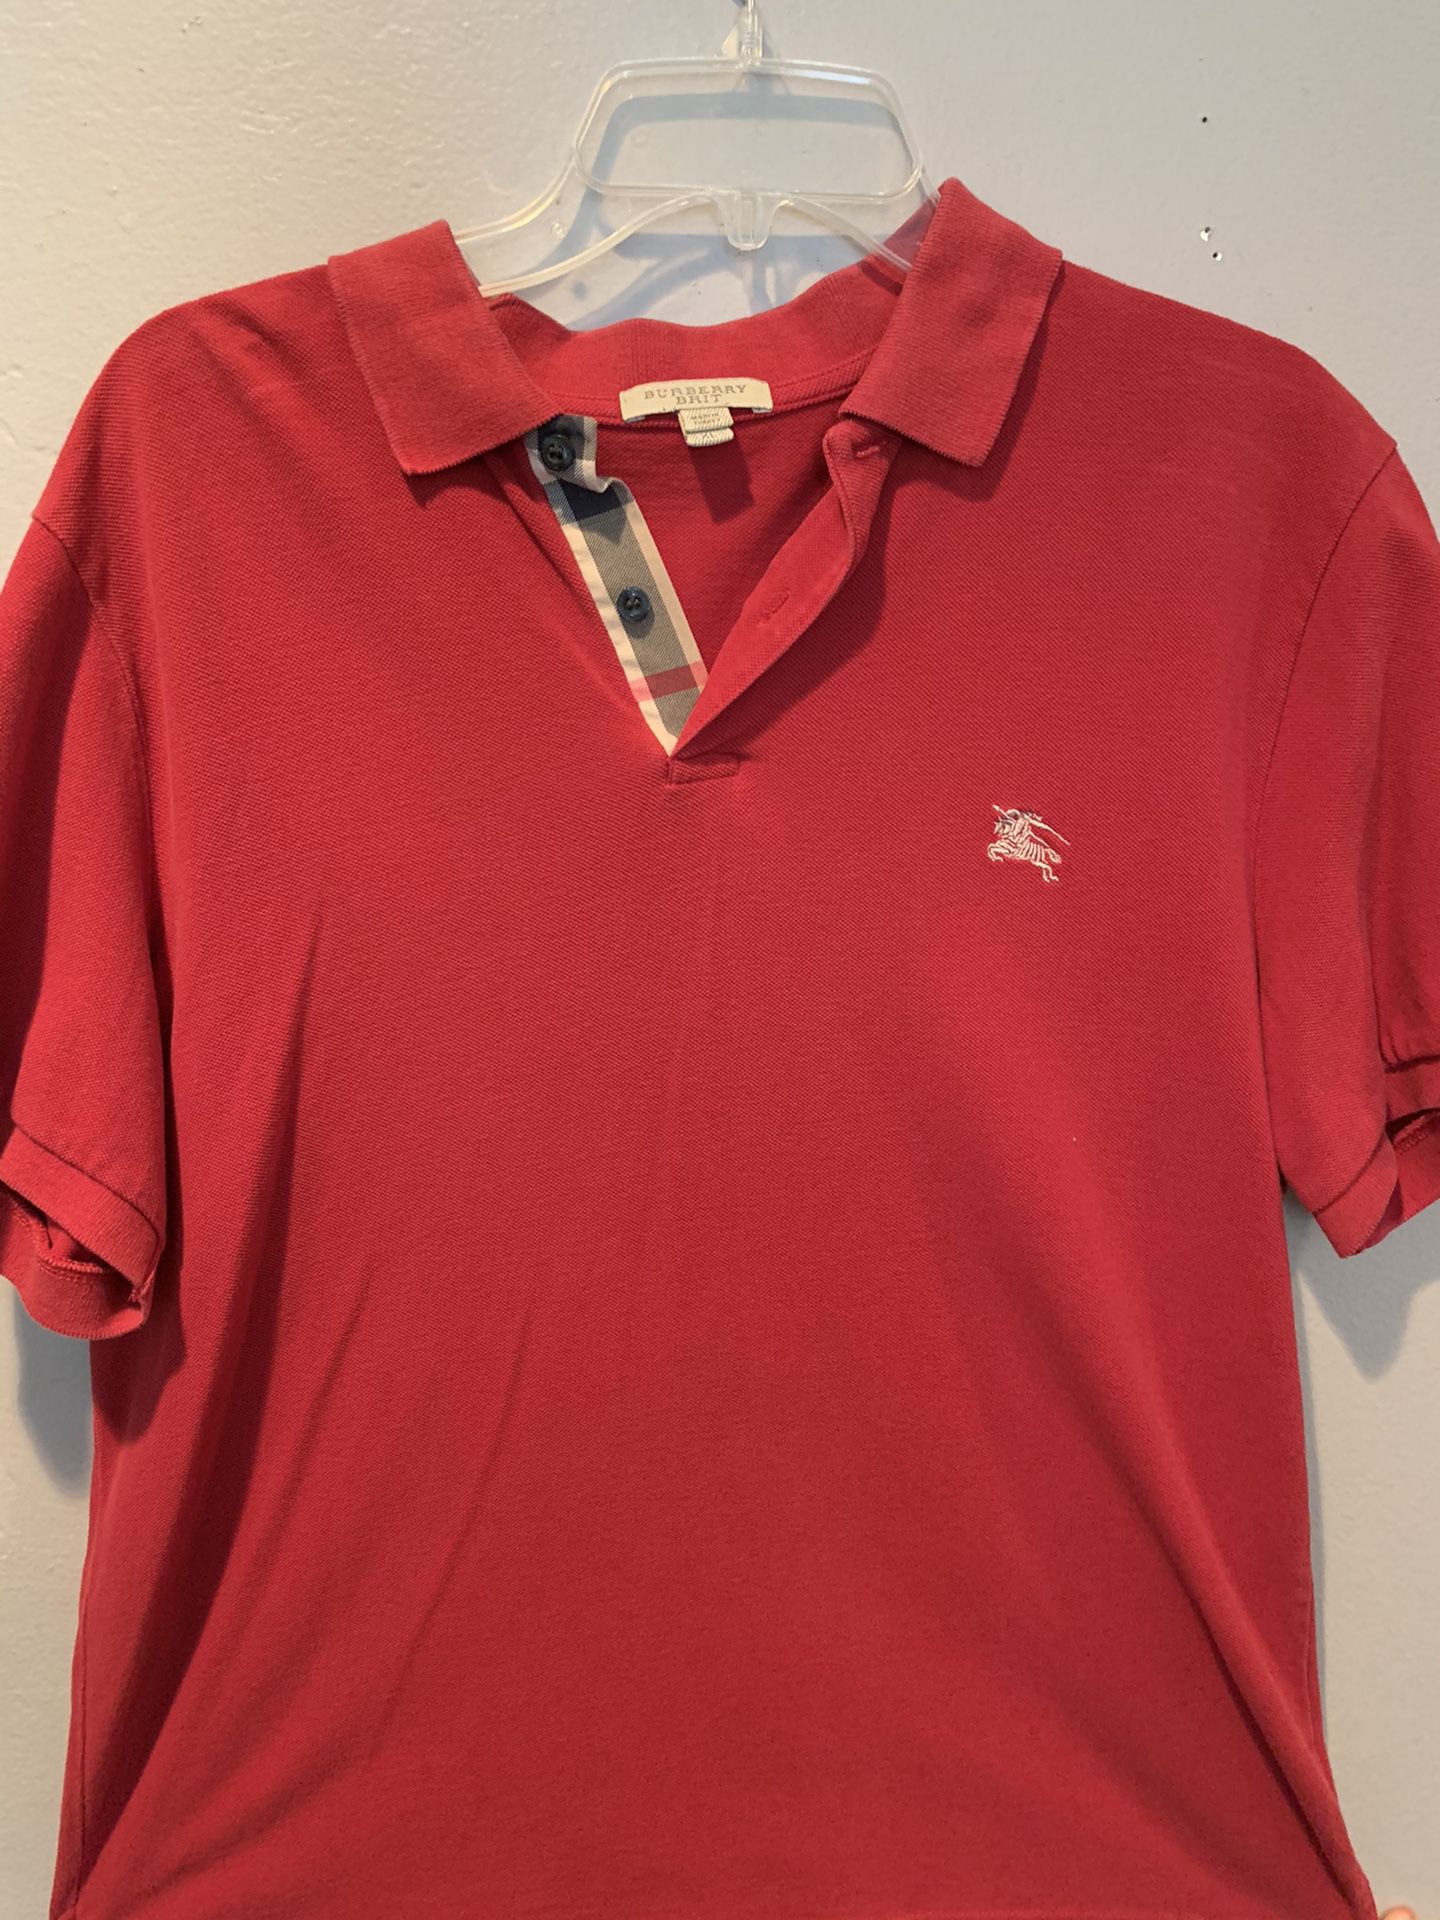 Burberry Brit (extra large) men’s red short sleeve polo